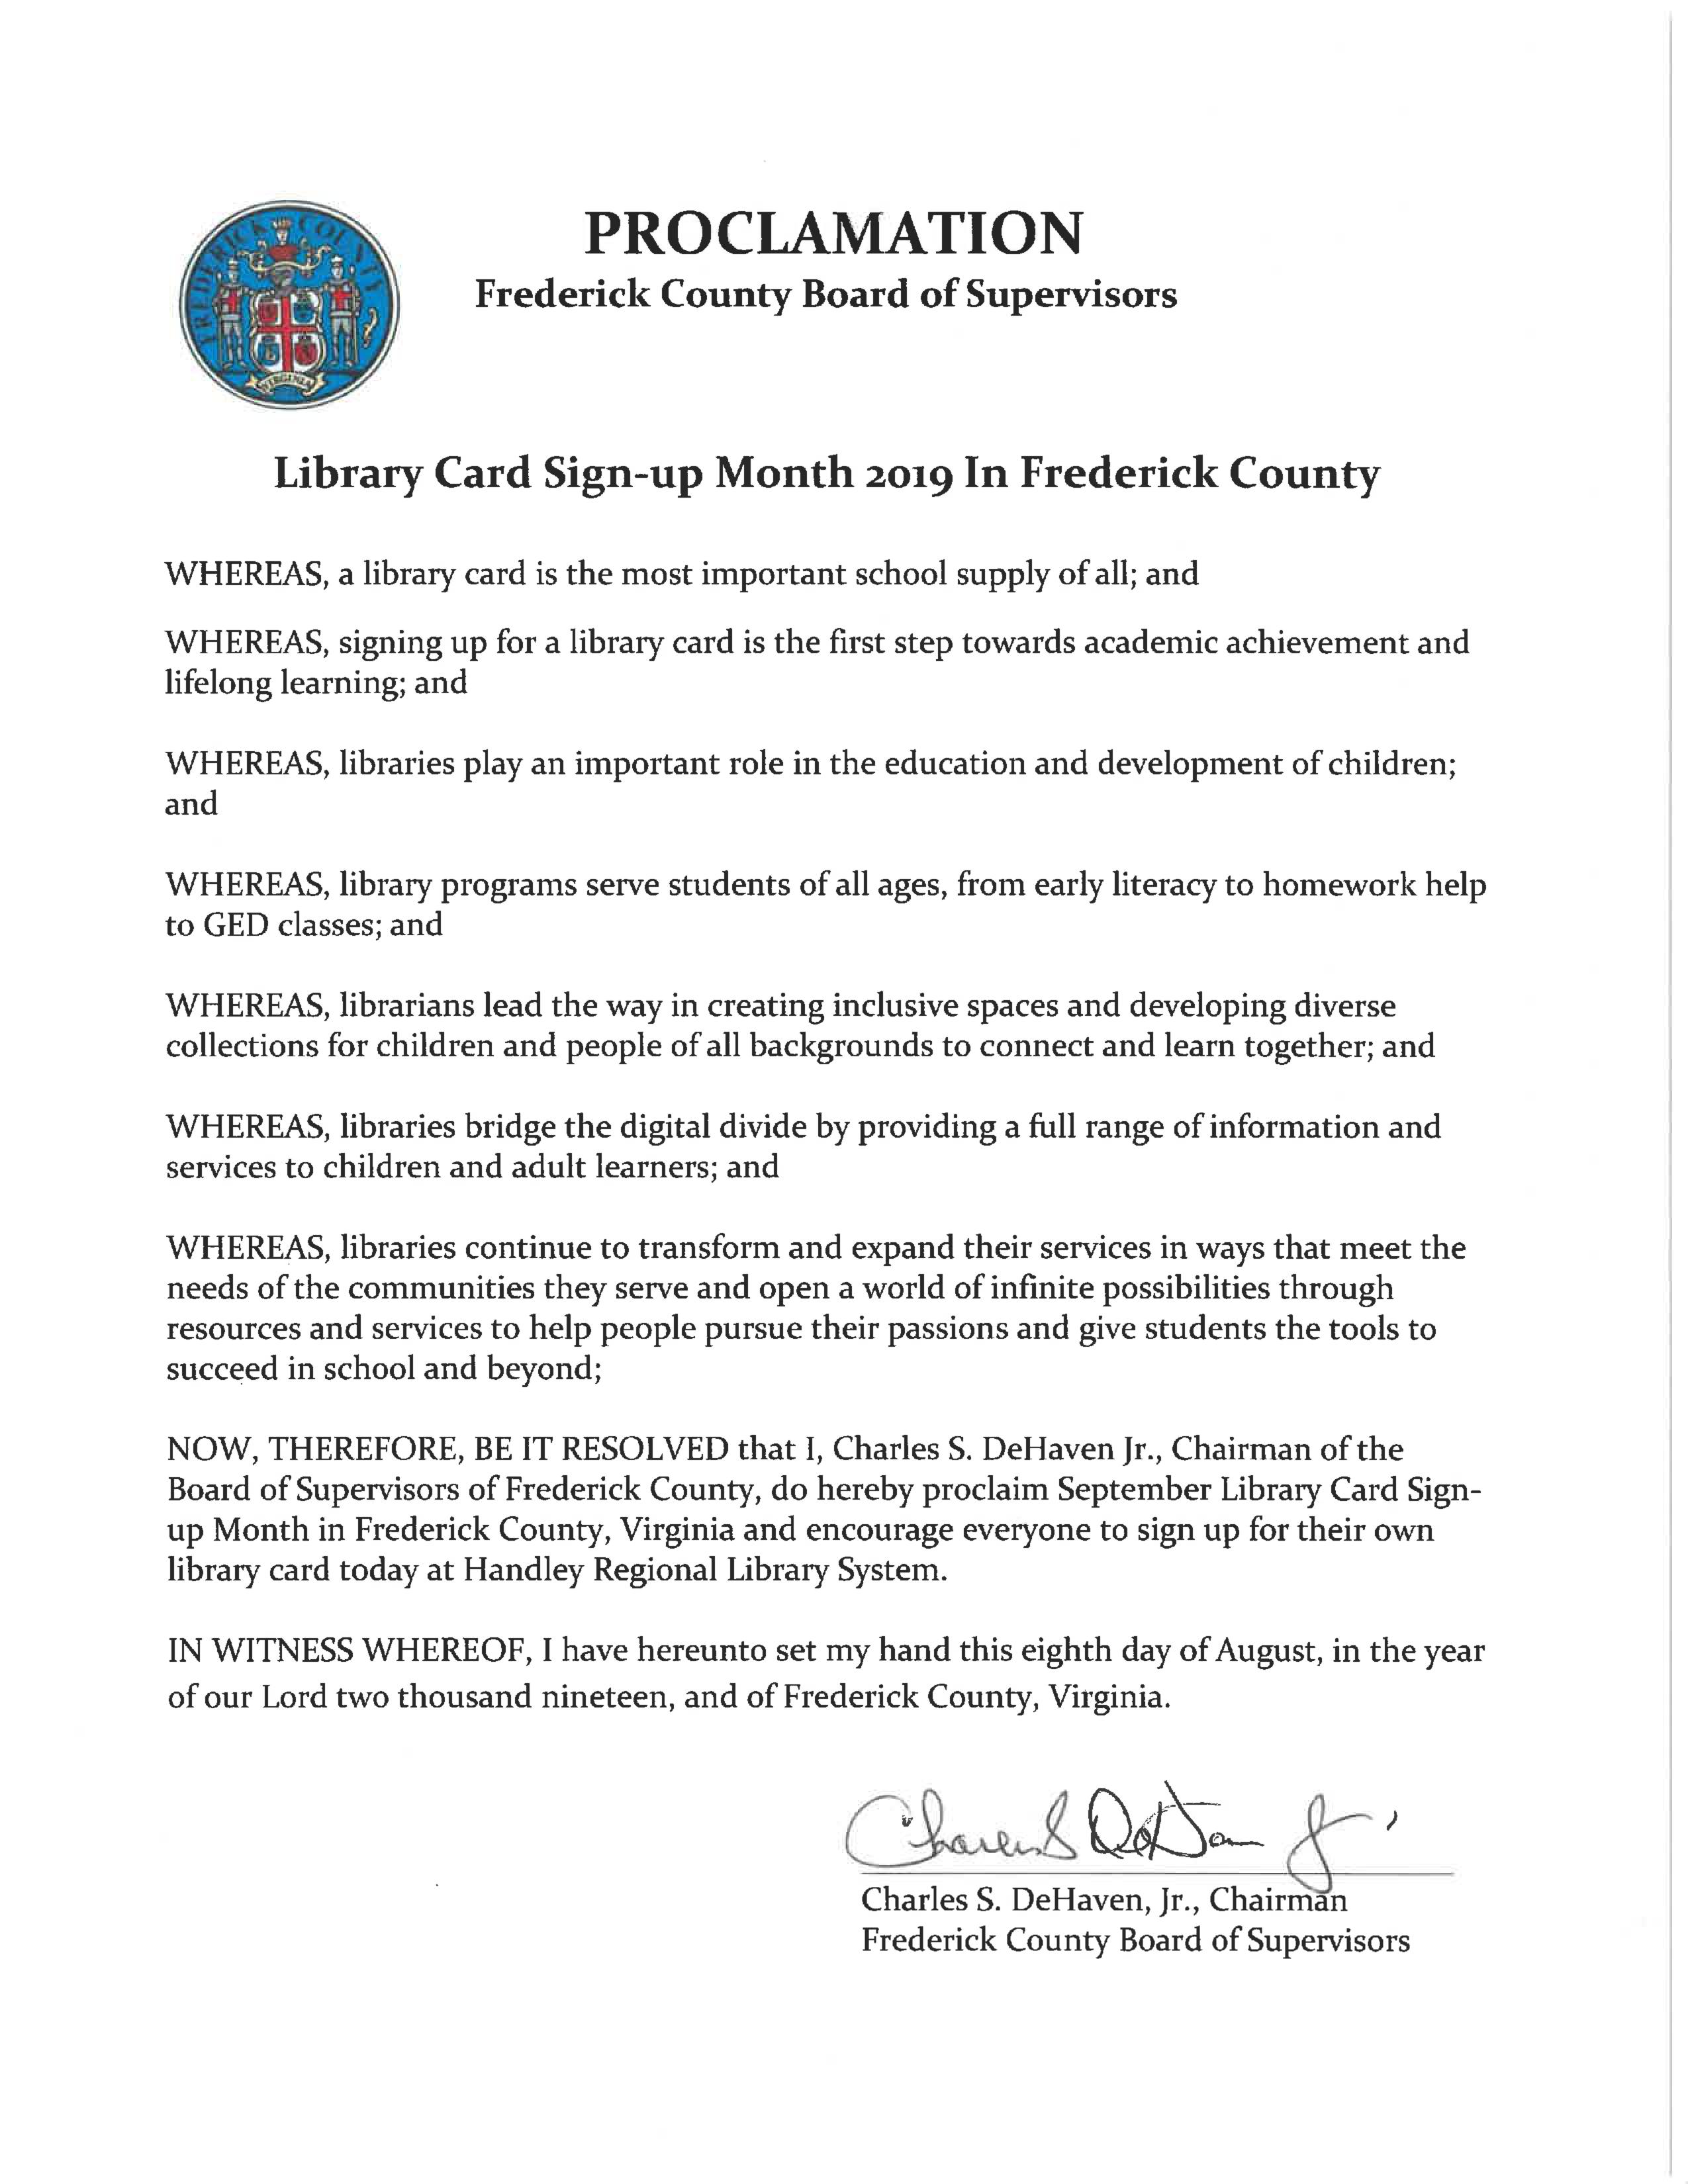 Fred Co Proclamation